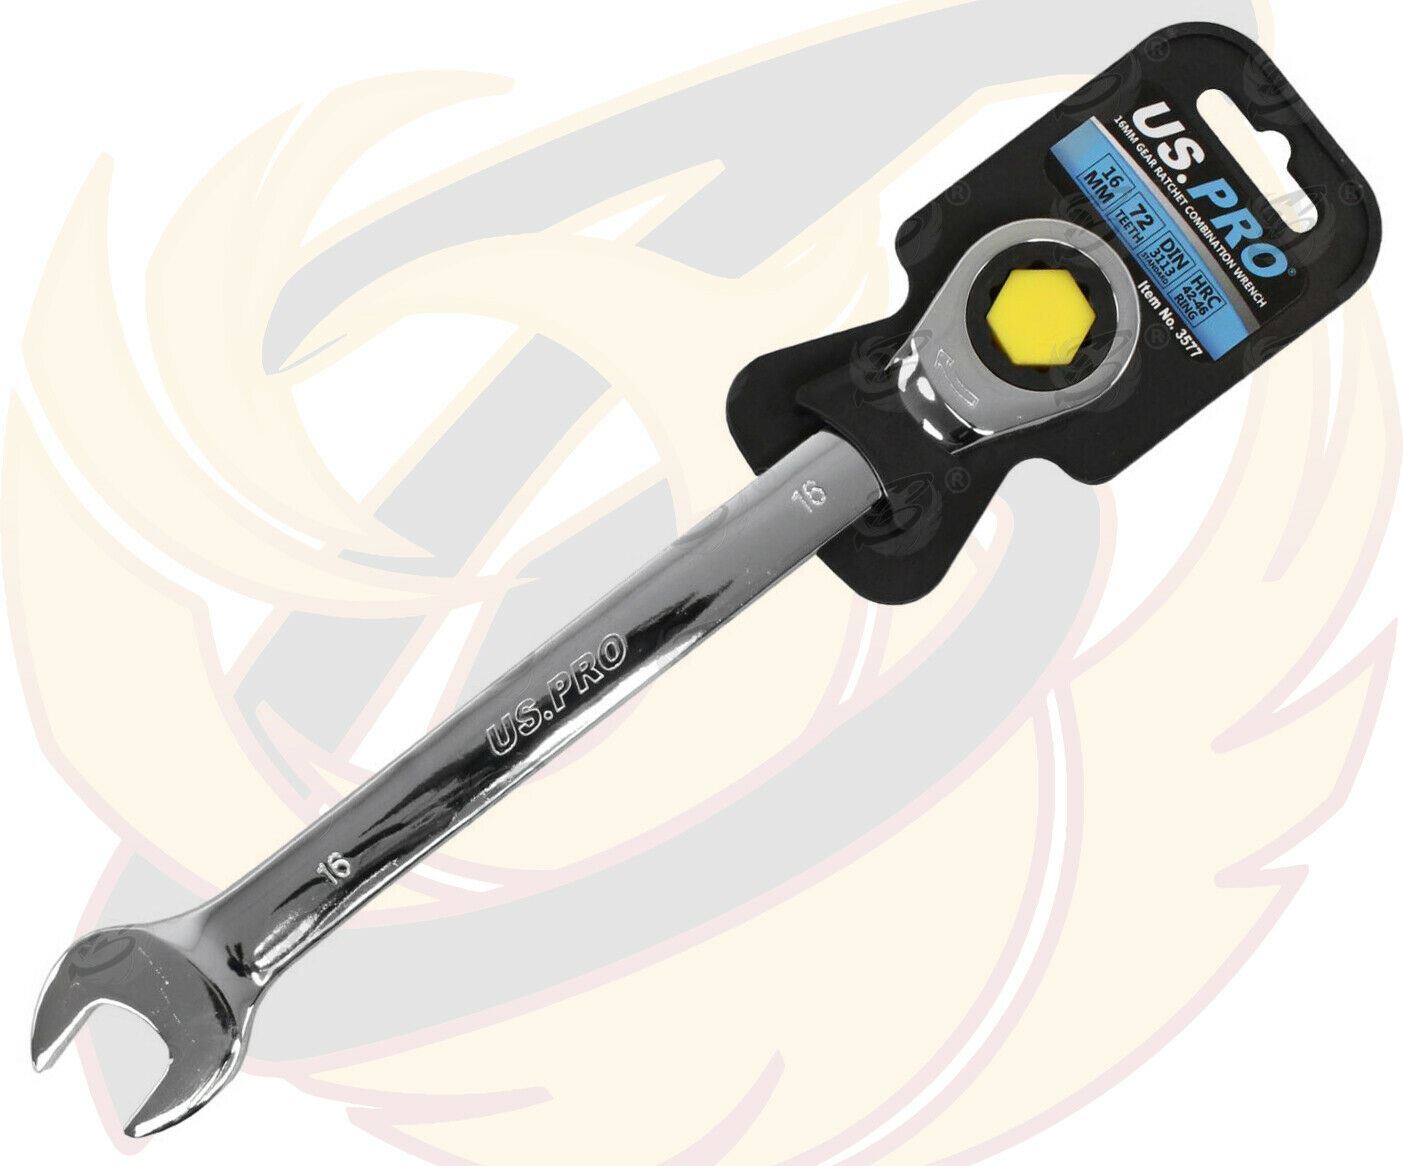 US PRO 16MM 72 TOOTH RATCHET SPANNER